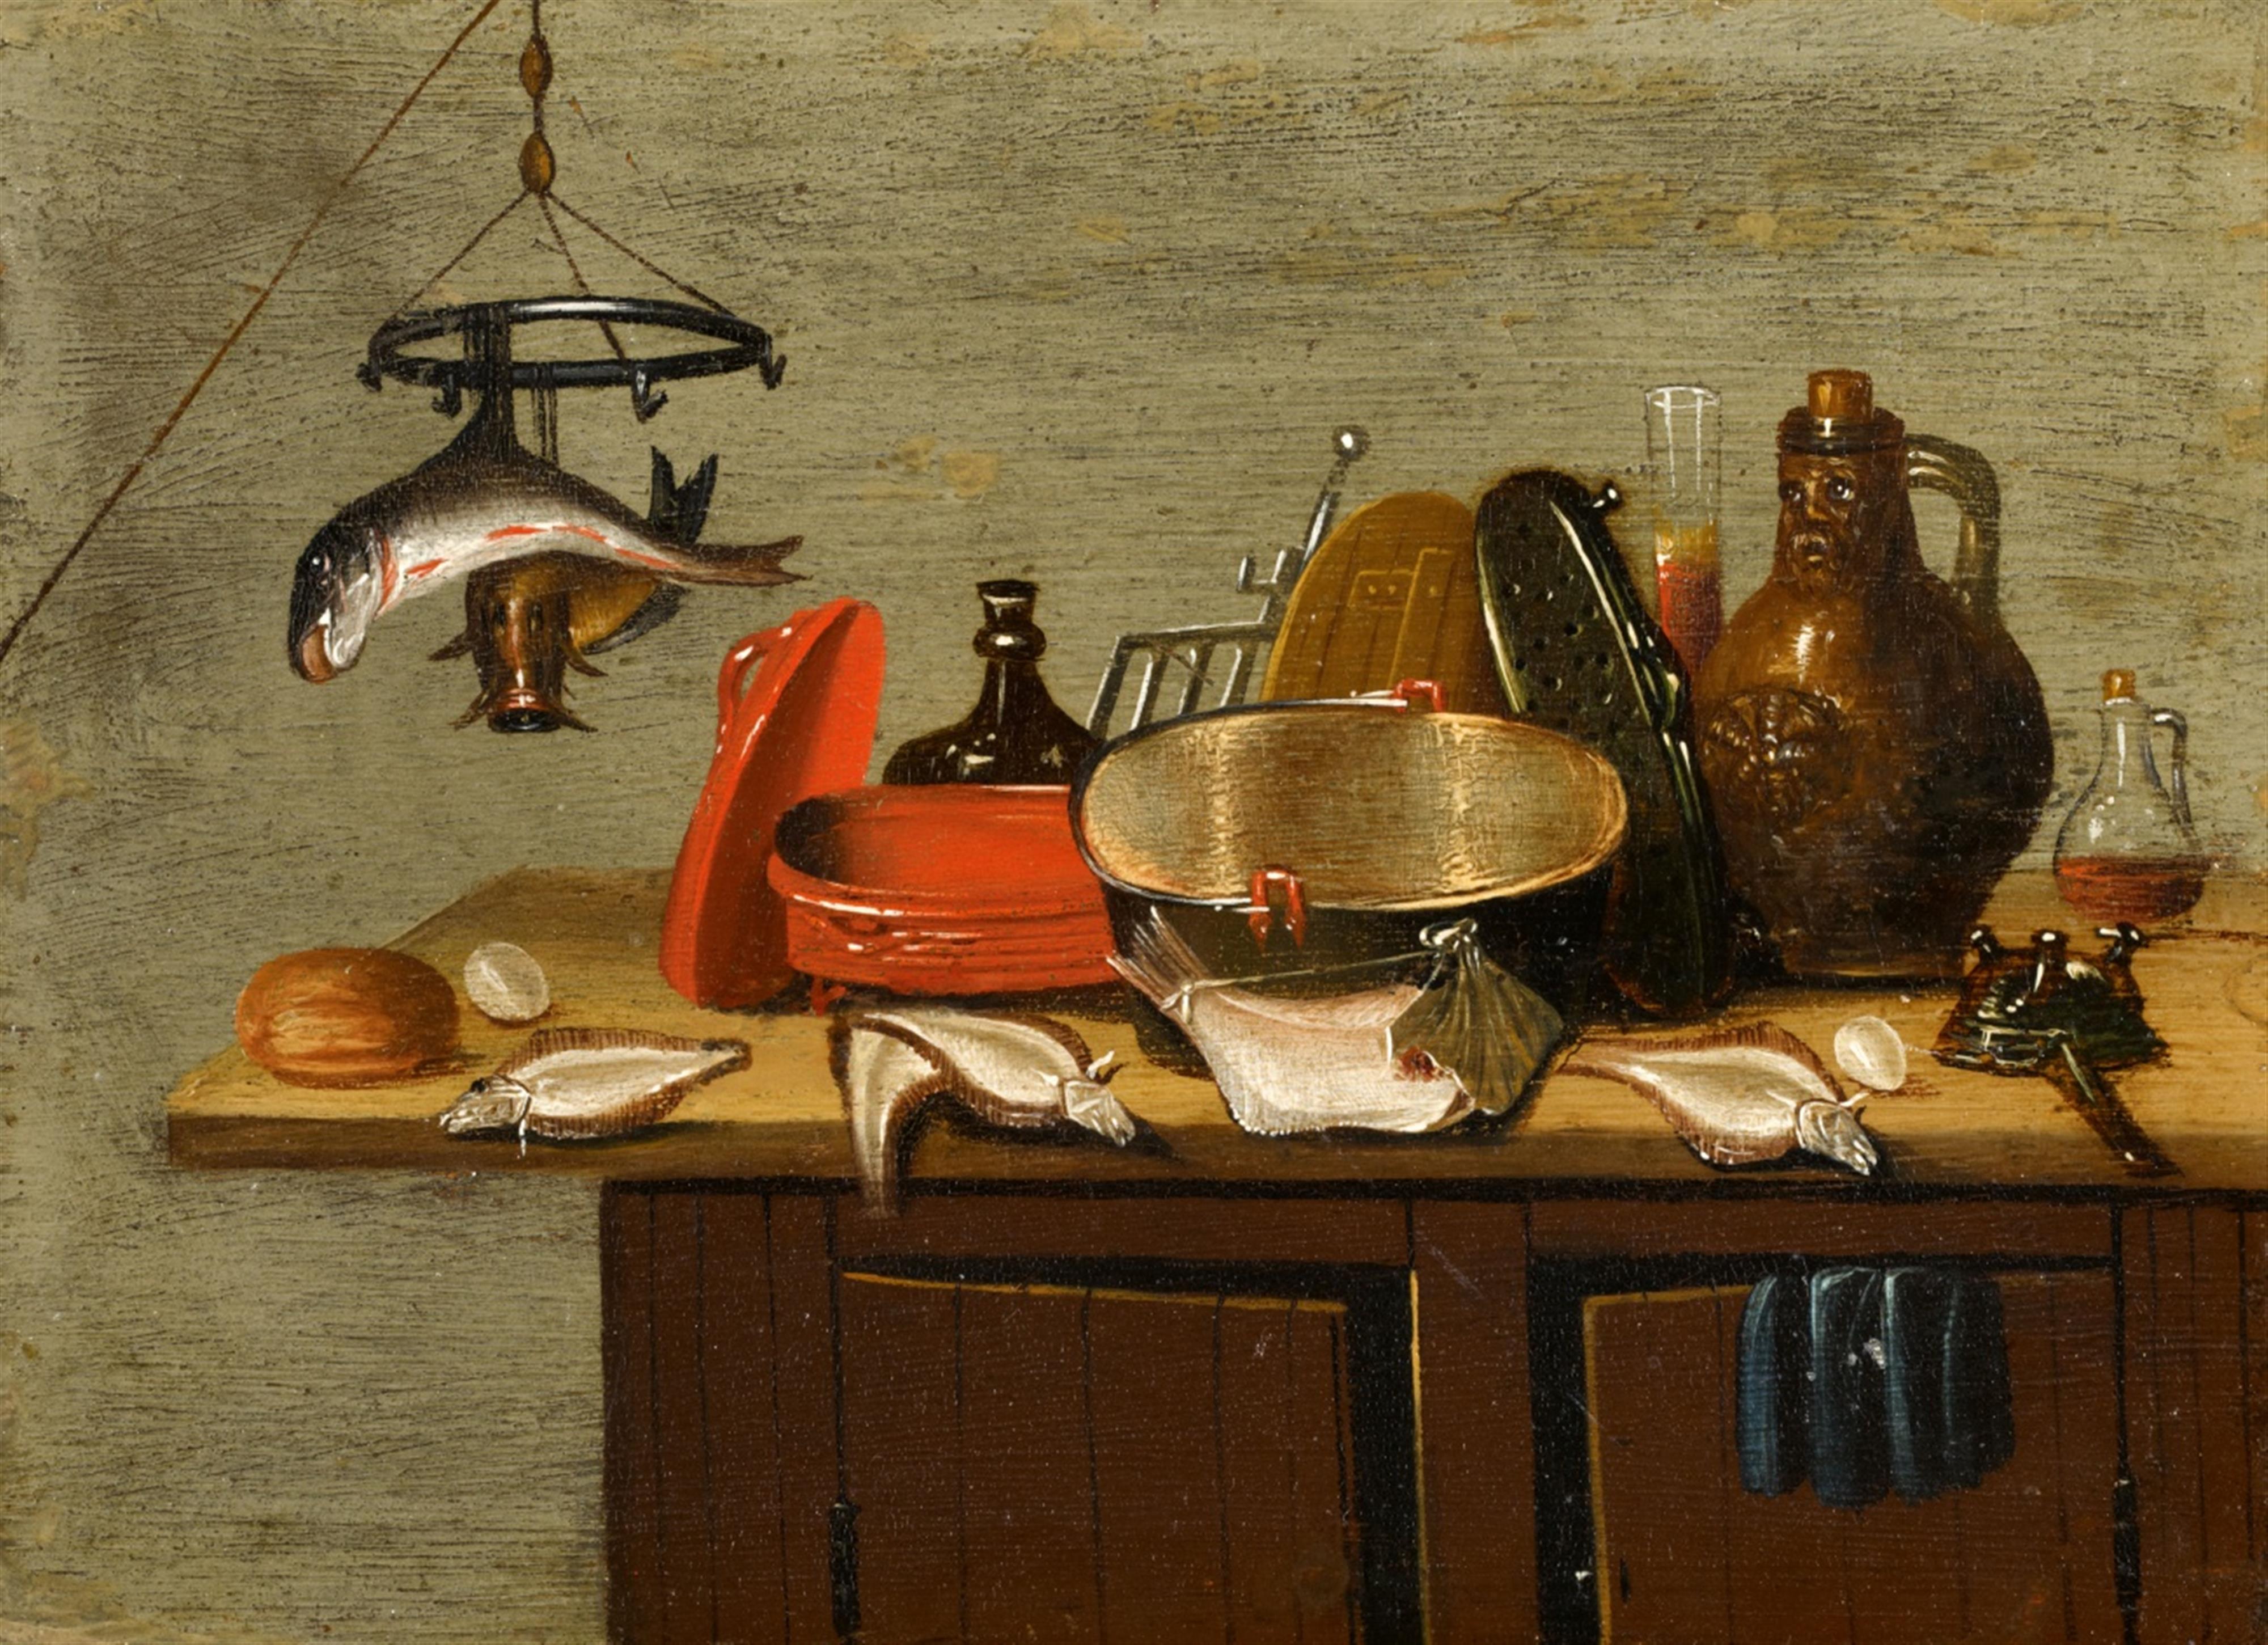 Gerrit van Vucht, attributed to - Kitchen Still Life with Fish, Pots, and a Bellarmine - image-1